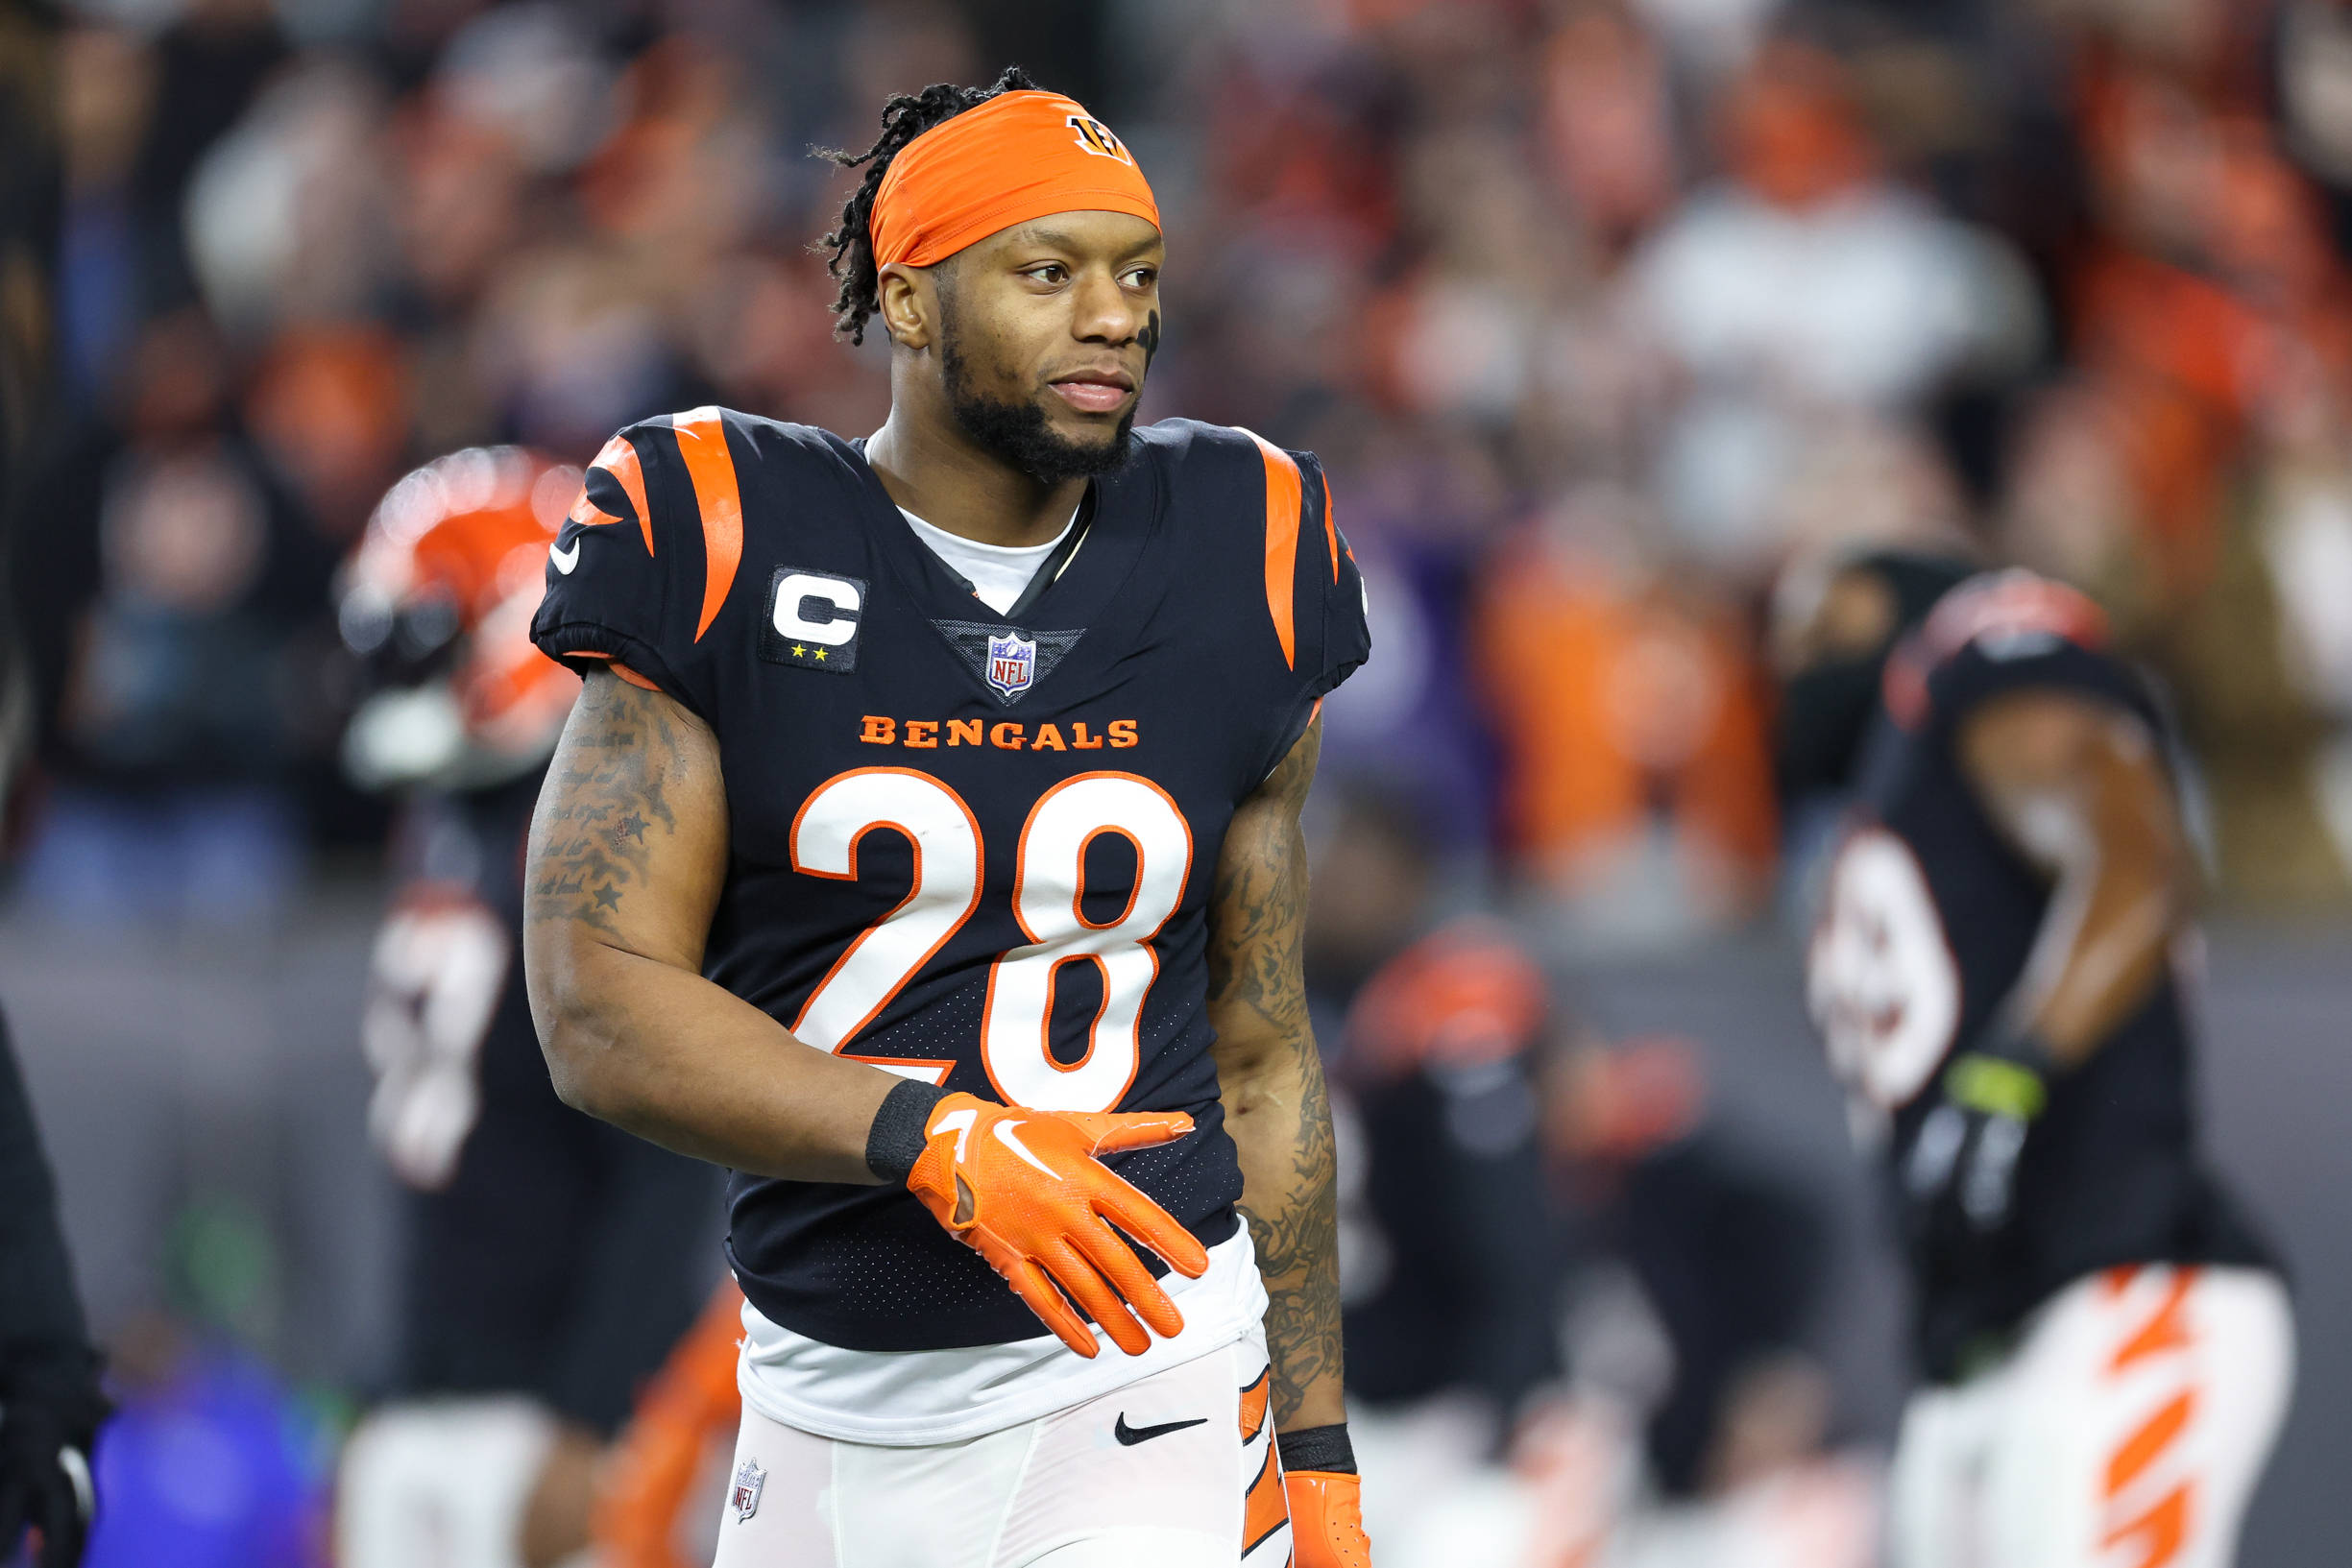 CINCINNATI, OH - JANUARY 15: Cincinnati Bengals running back Joe Mixon 28 warms up before the game against the Baltimore Ravens and the Cincinnati Bengals on January 15, 2023, at Paycor Stadium in Cincinnati, OH. Photo by Ian Johnson/Icon Sportswire NFL, American Football Herren, USA JAN 15 AFC Wild Card Playoffs - Ravens at Bengals Icon230115070